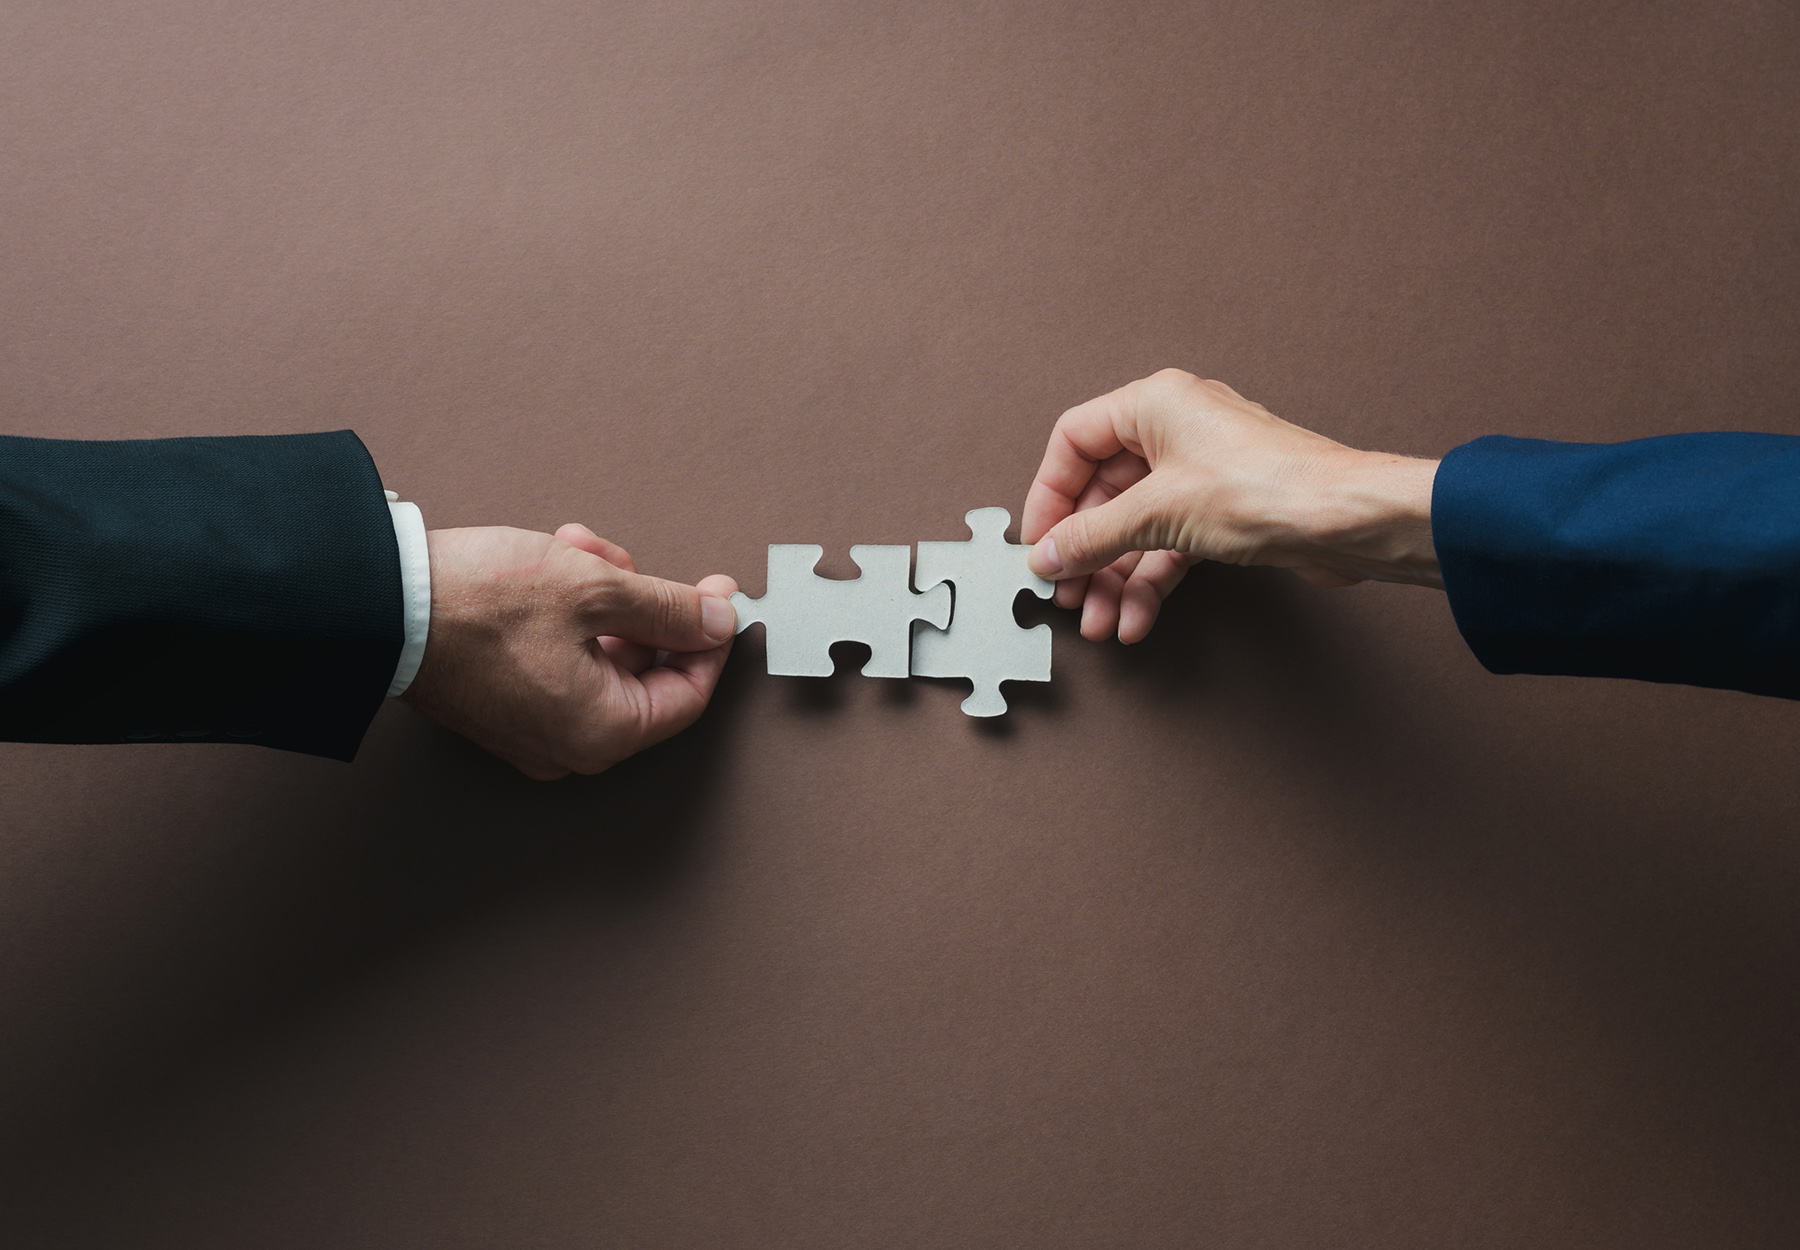 Closeup of hands of business people putting puzzle pieces together. Merger and acquisition concept. iStock image.